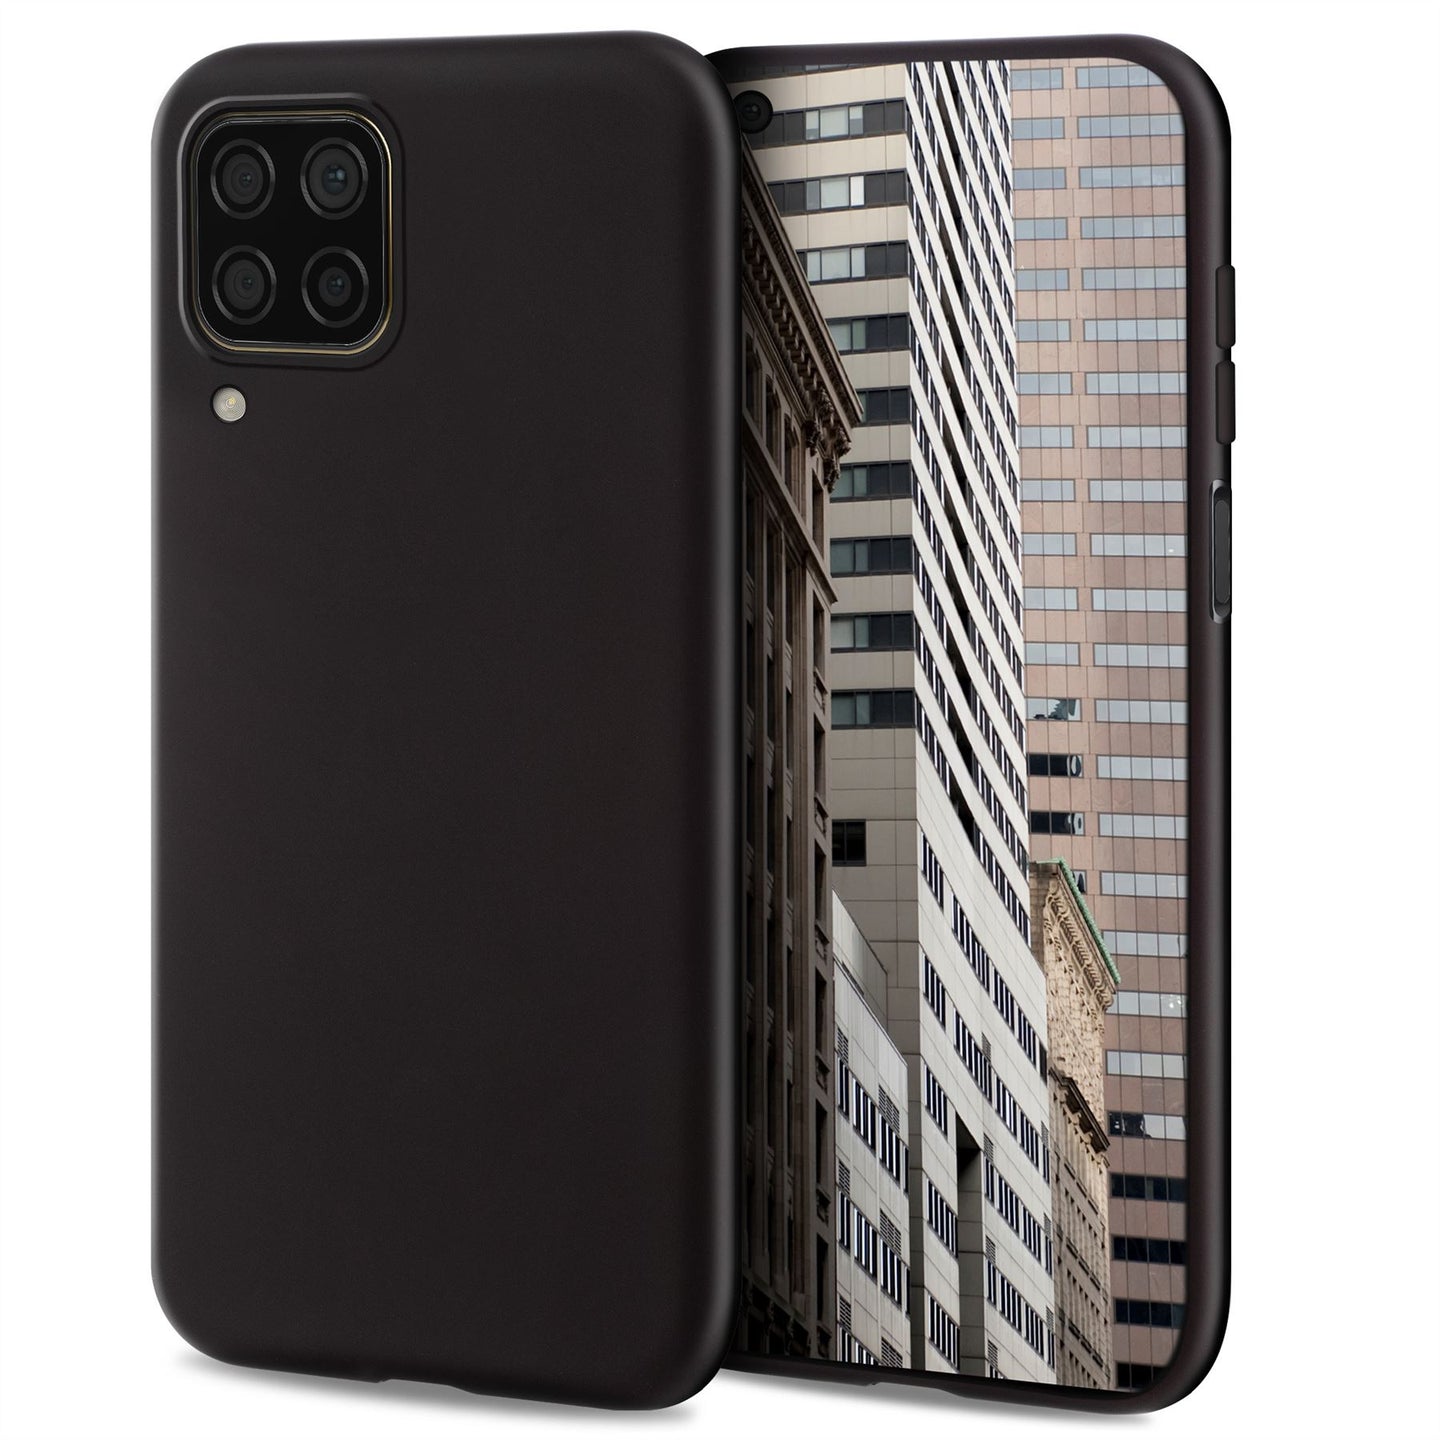 Moozy Lifestyle. Designed for Huawei P40 Lite Case, Black - Liquid Silicone Cover with Matte Finish and Soft Microfiber Lining